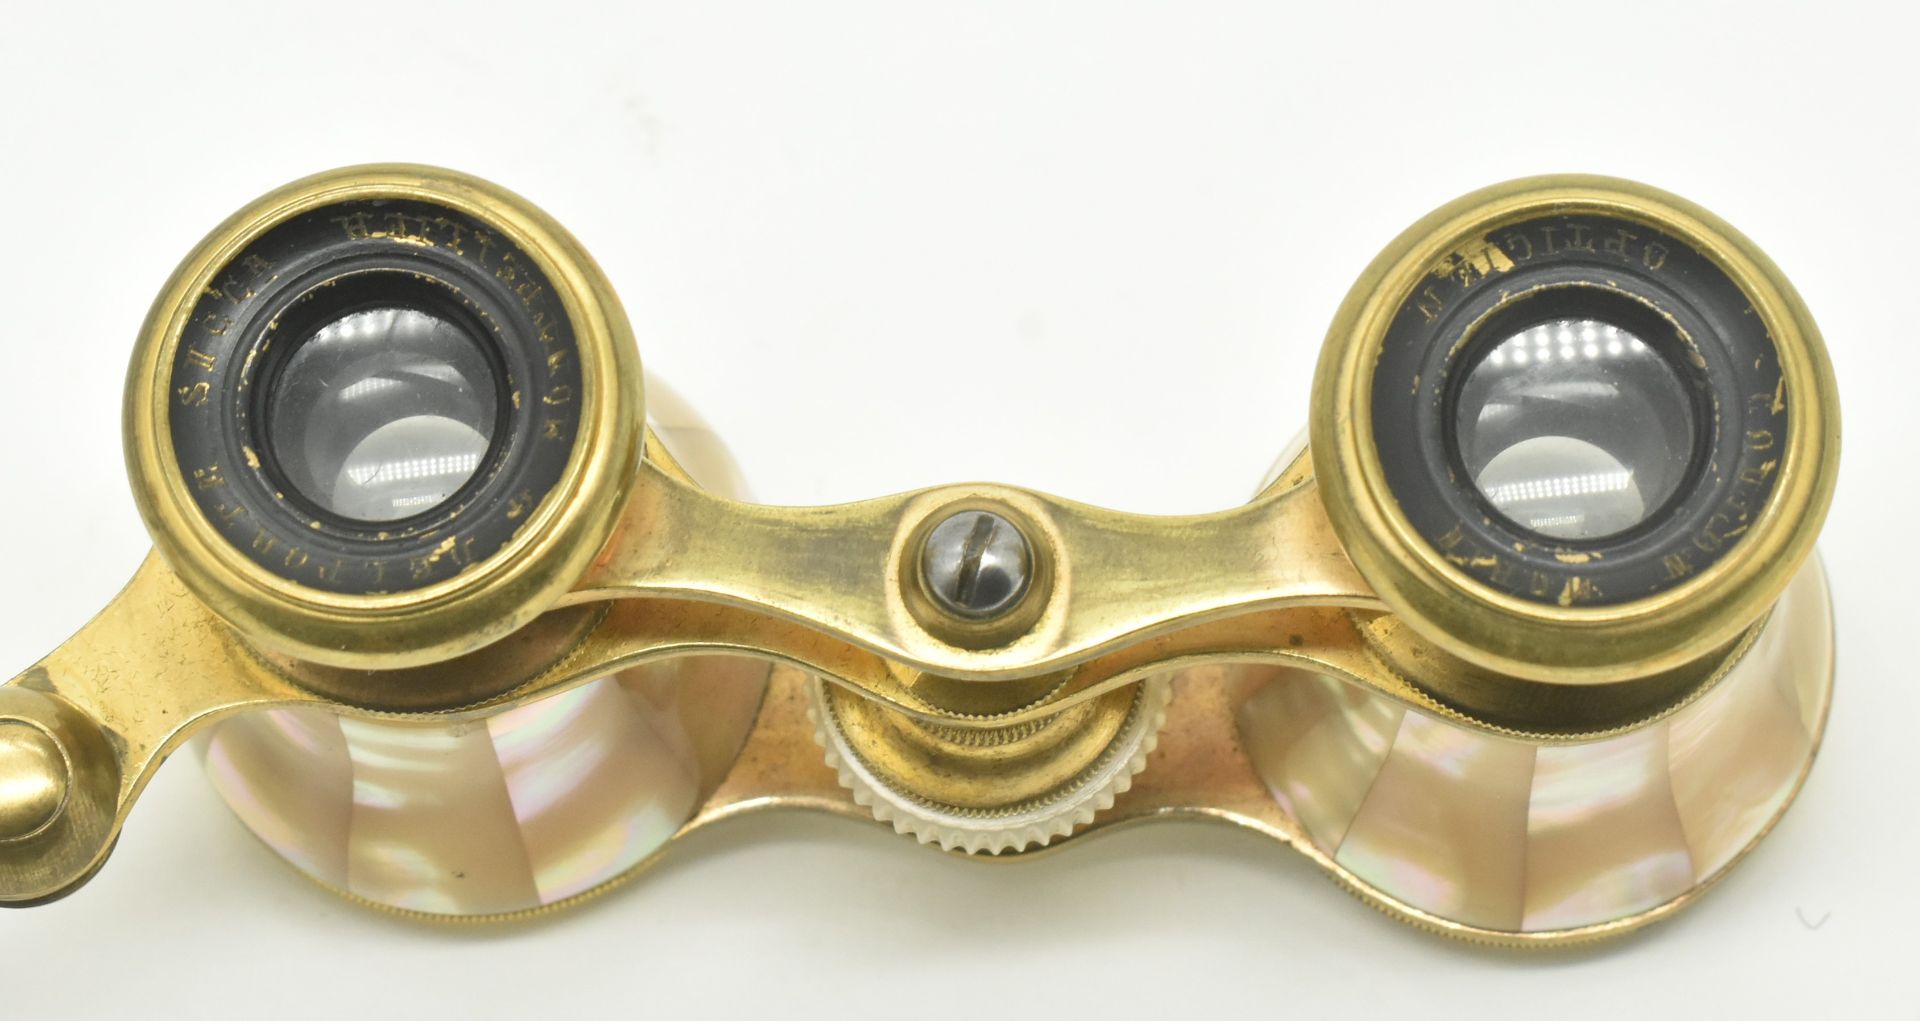 FRENCH 19TH CENTURY PAIR OF MOTHER OF PEARL OPERA GLASSES - Image 4 of 7